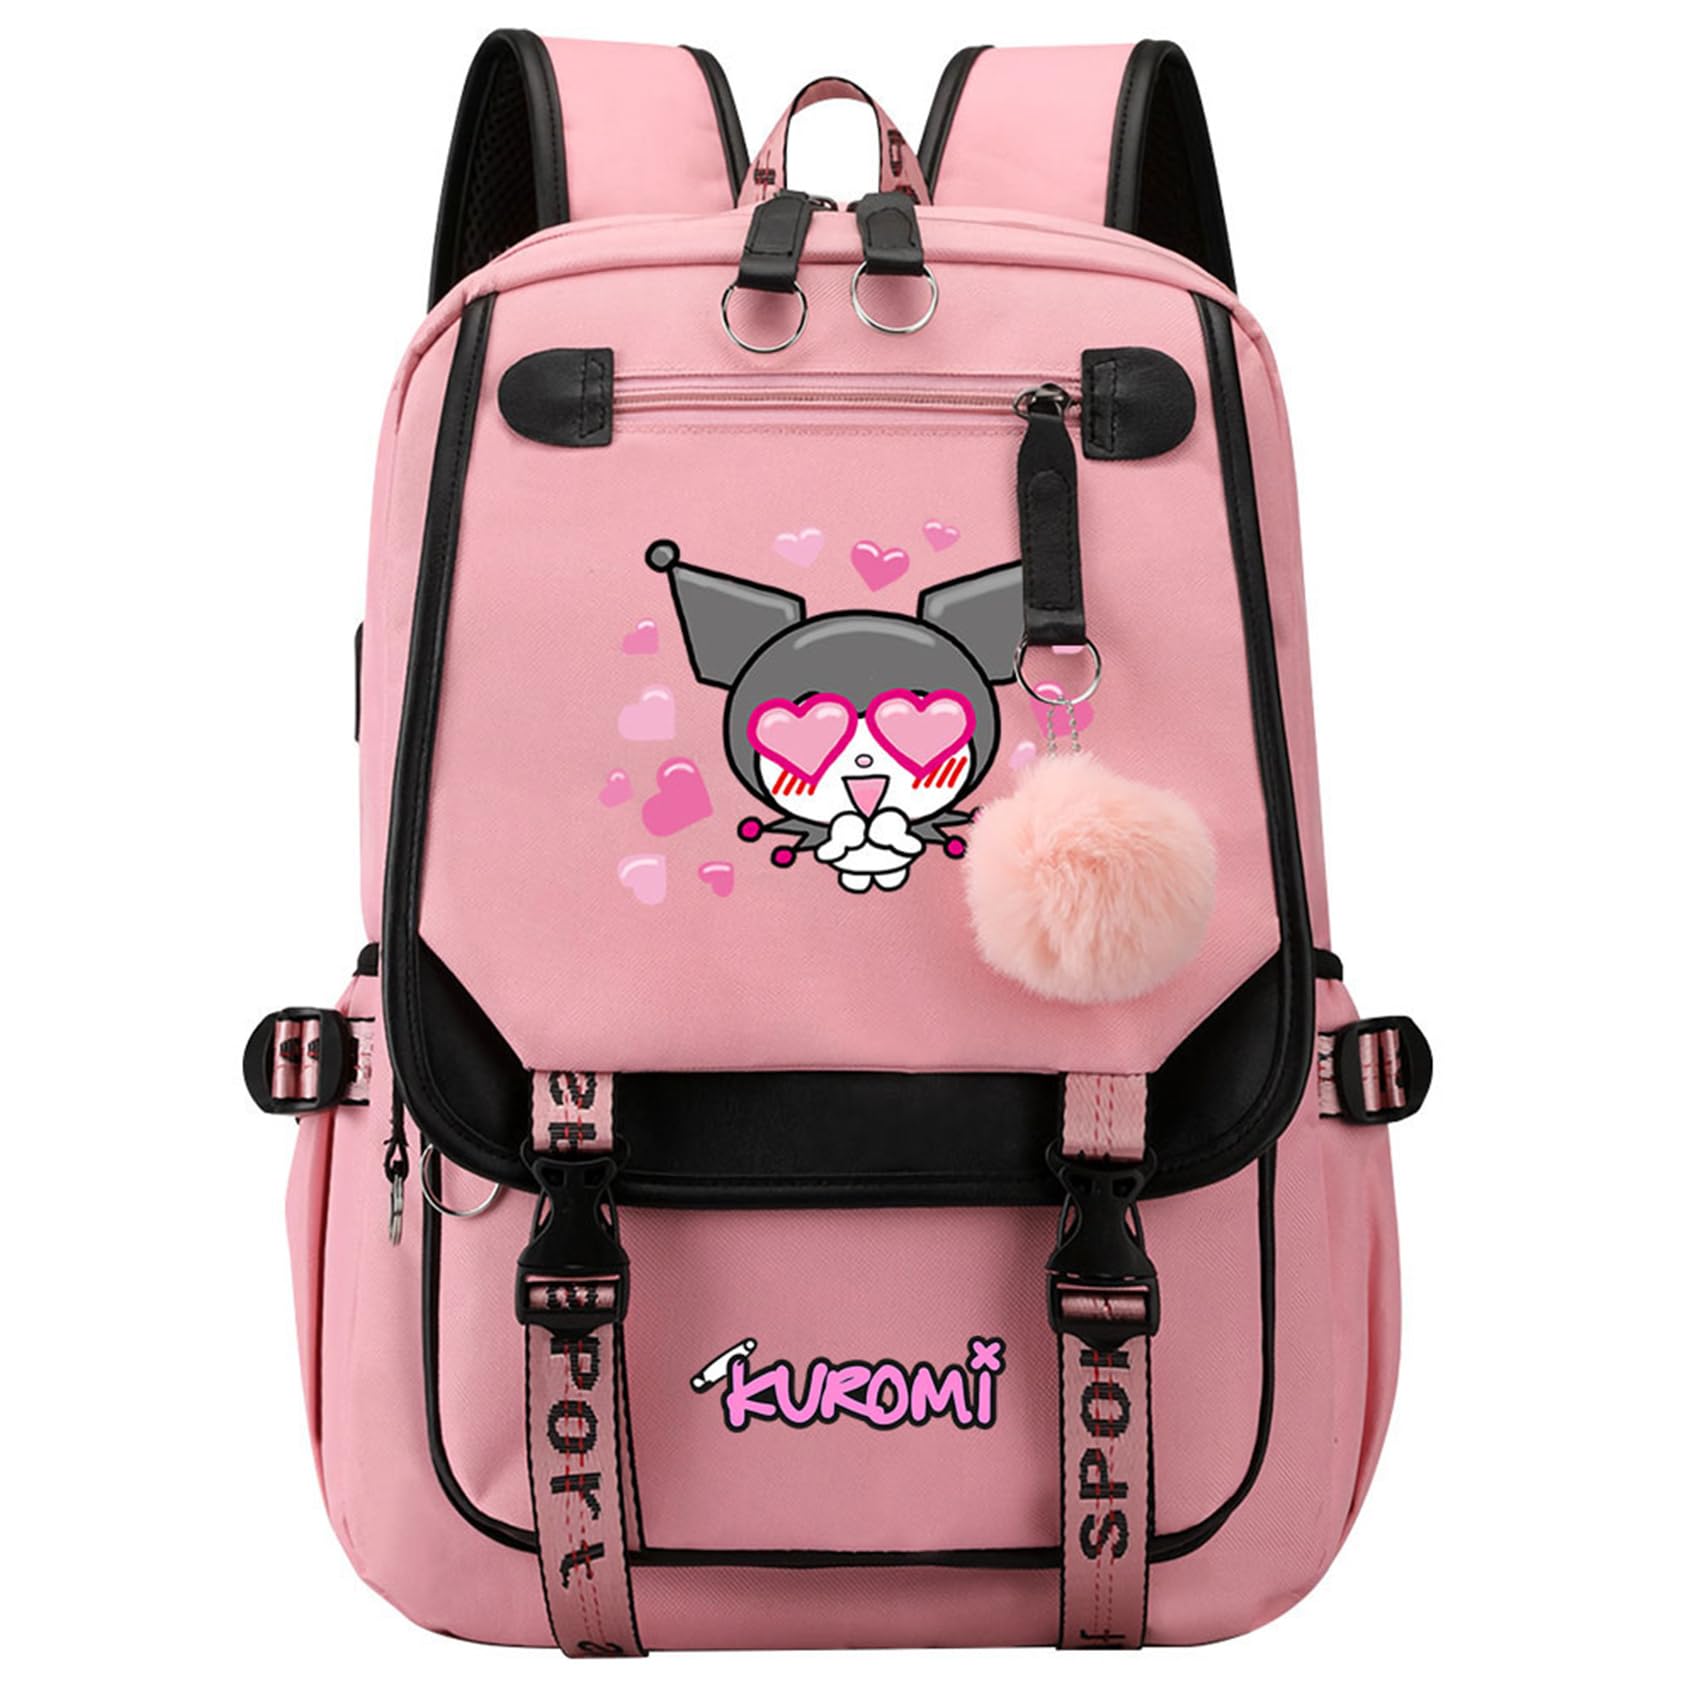 UMocan Bookbag with USB Charger Port Student Casual Laptop Bag Anime Graphic Travel Daypack